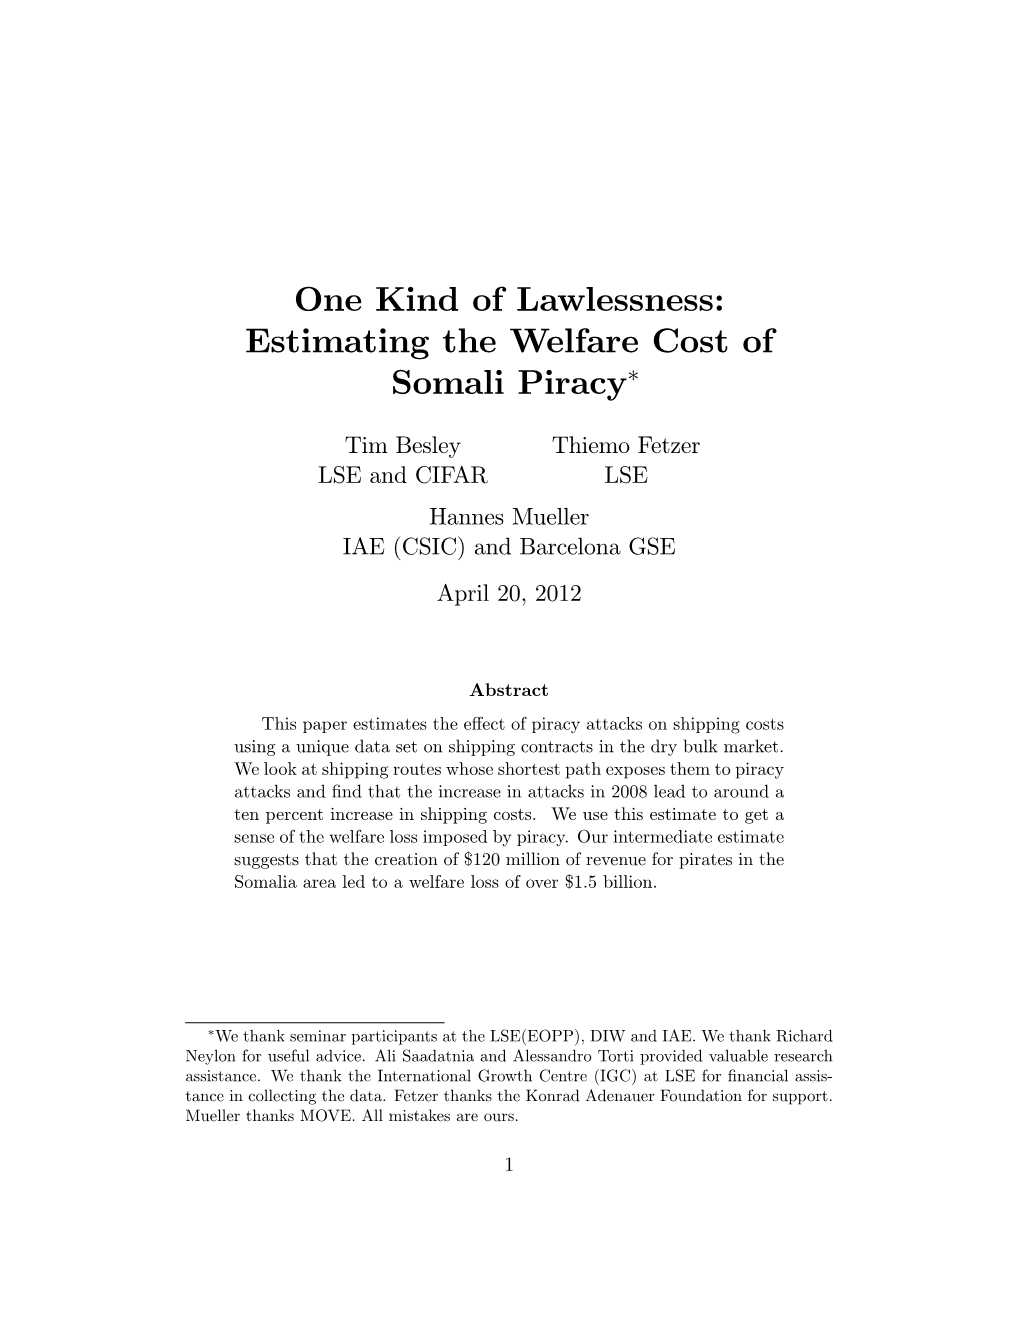 One Kind of Lawlessness: Estimating the Welfare Cost of Somali Piracy!